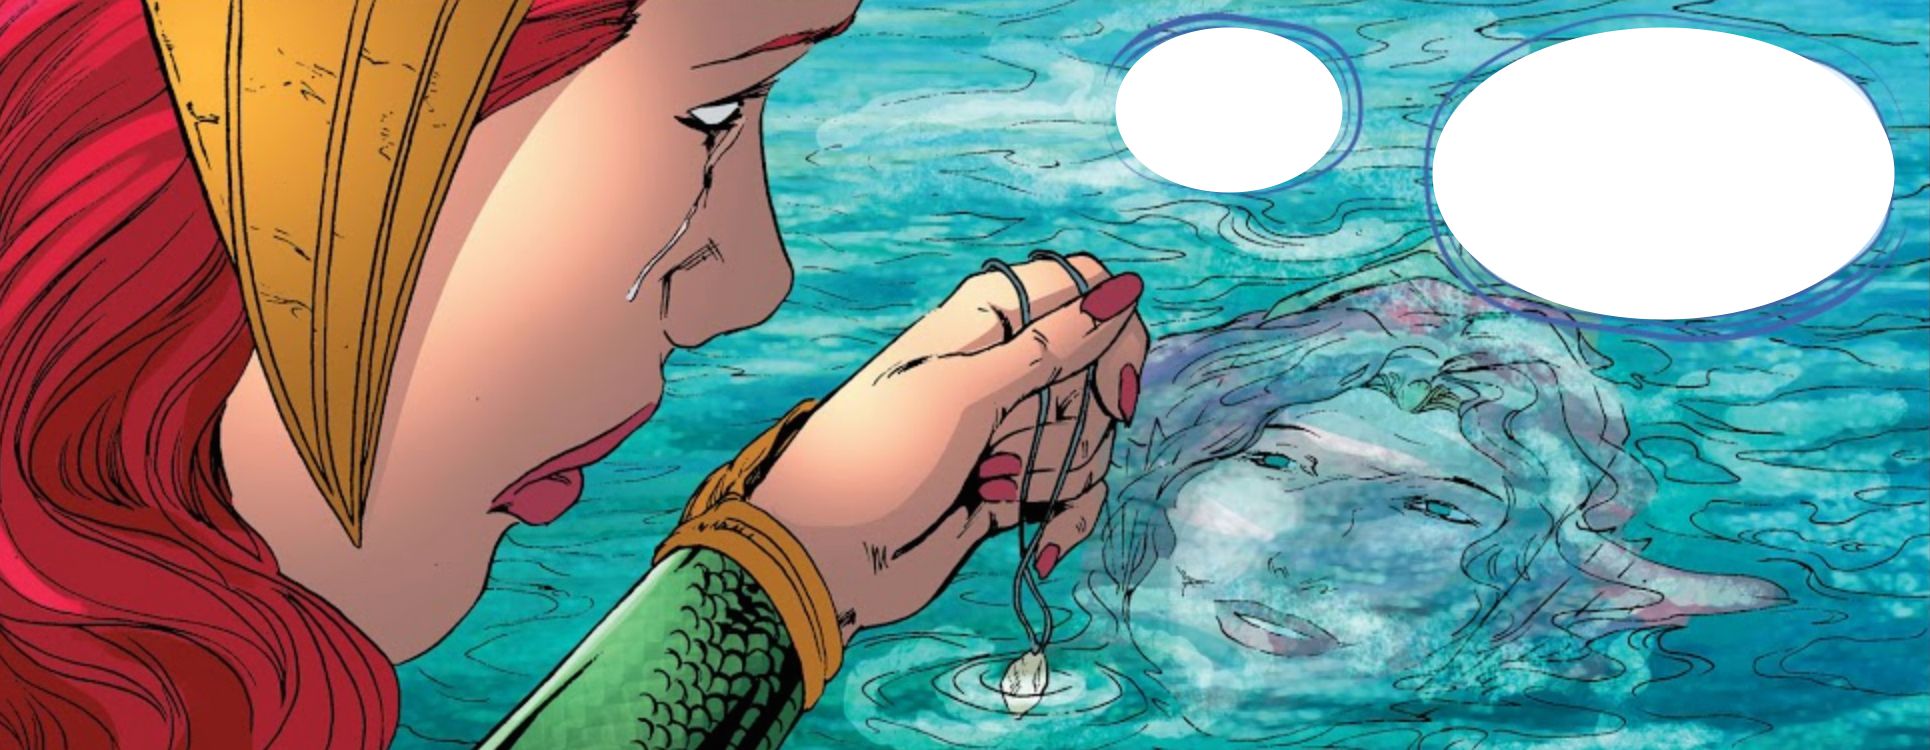 Mera Gets A Shell Of Sounds From Her Mother